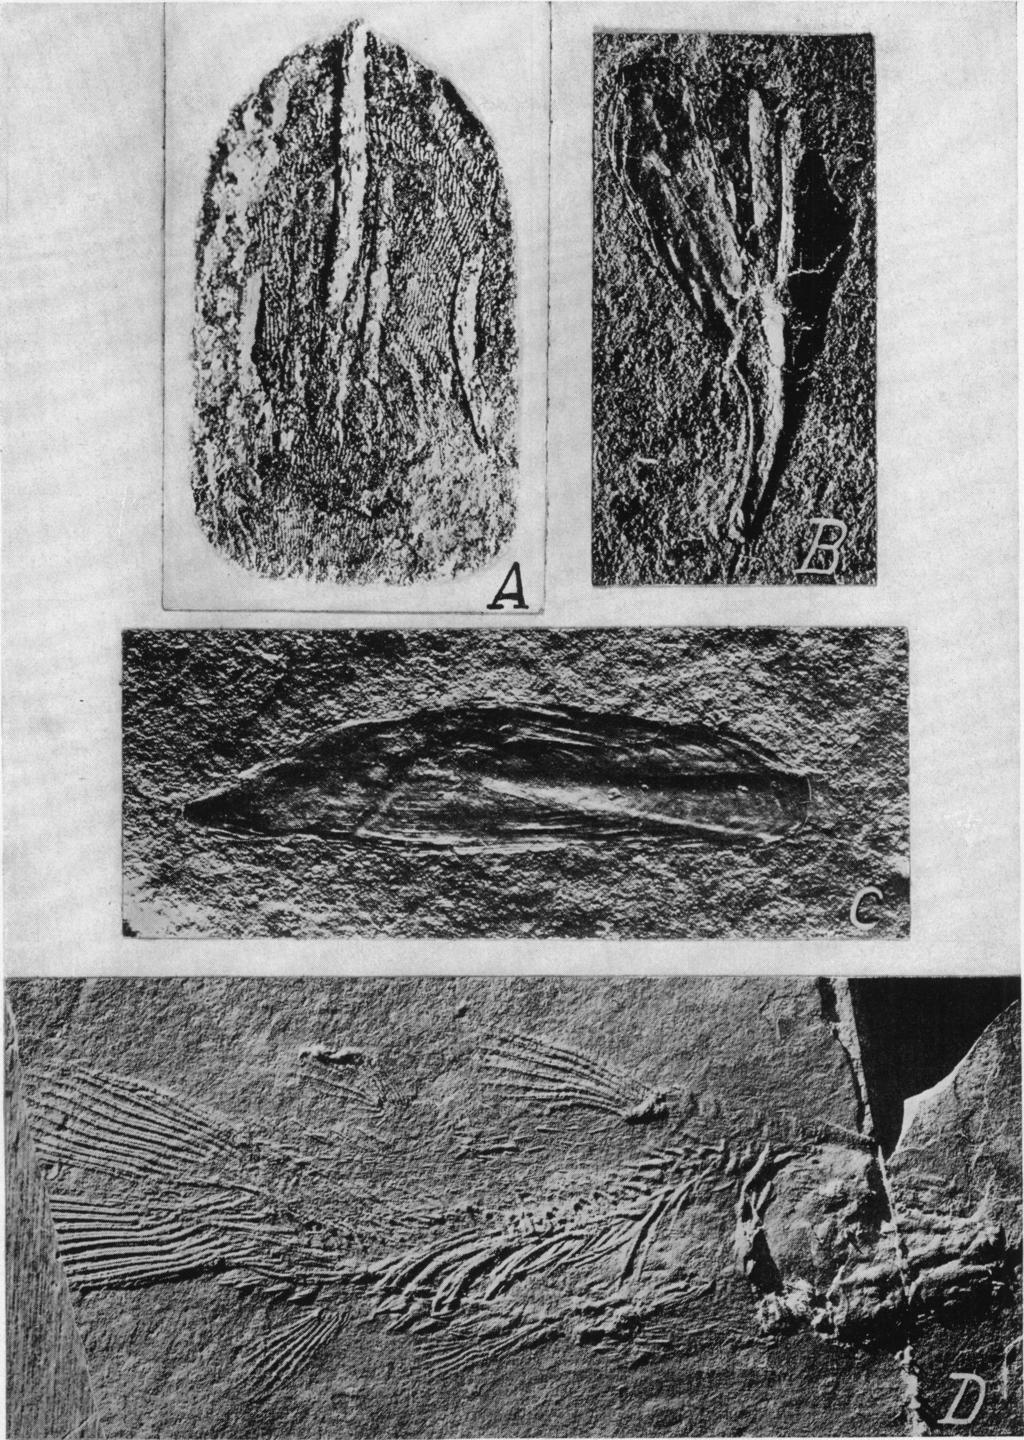 A. B. C. D. X1.4. Fig. 2. Osteopleuerus newarki. Isolated scale showing details of sculpturing. X 18.0.